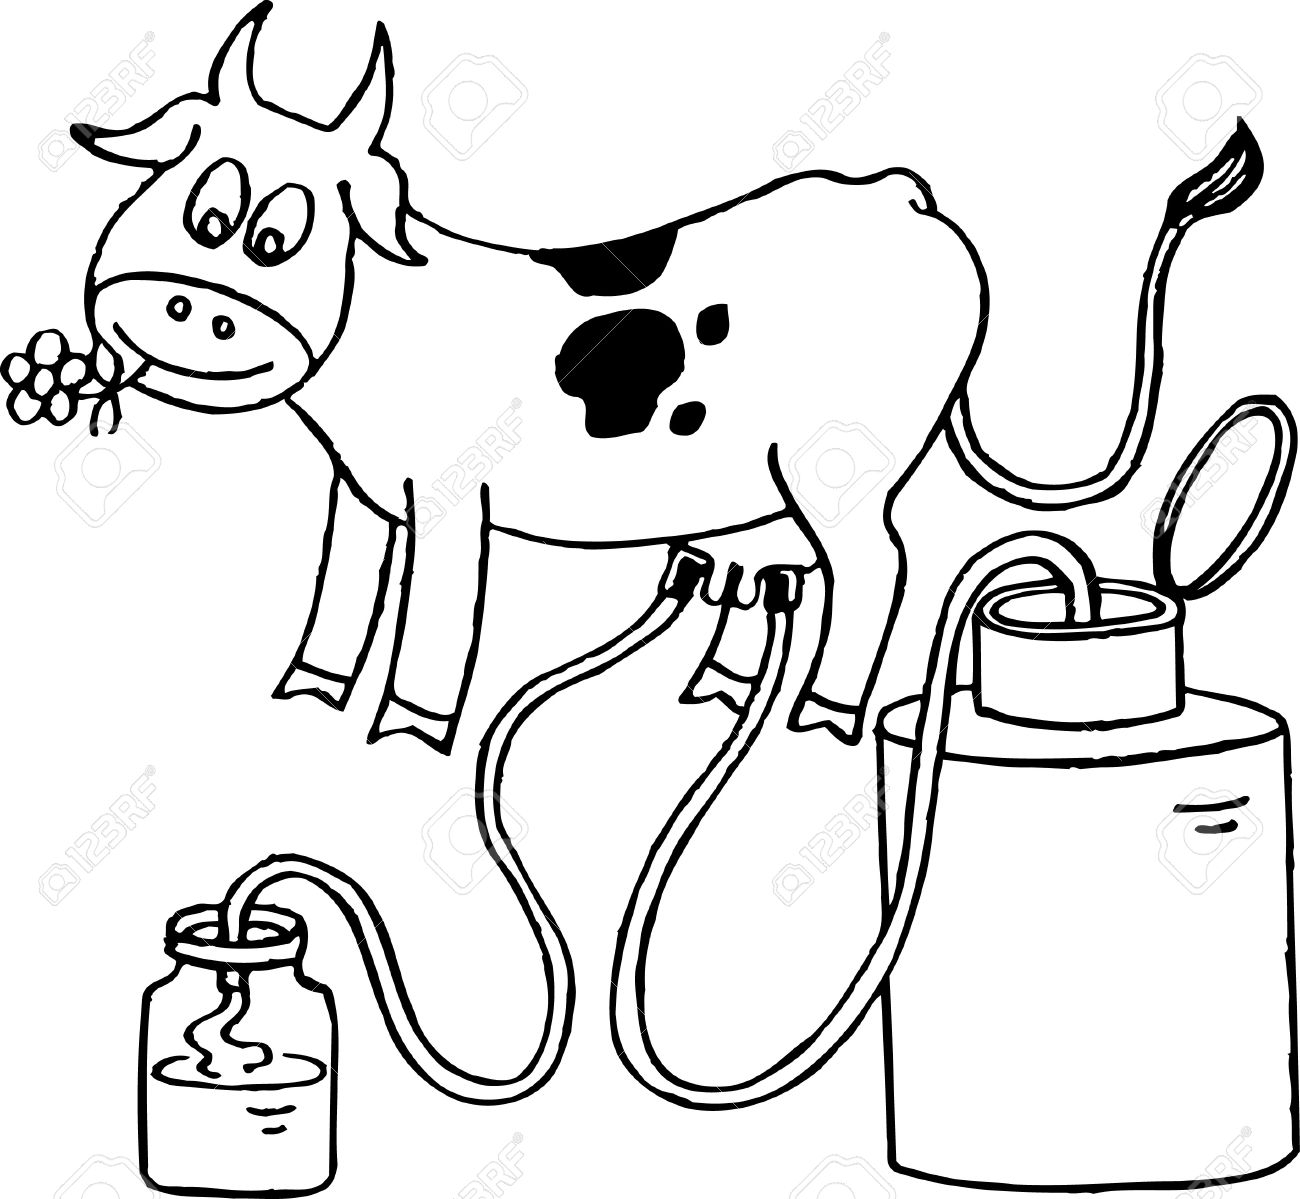 Cow Giving Milk Clipart.